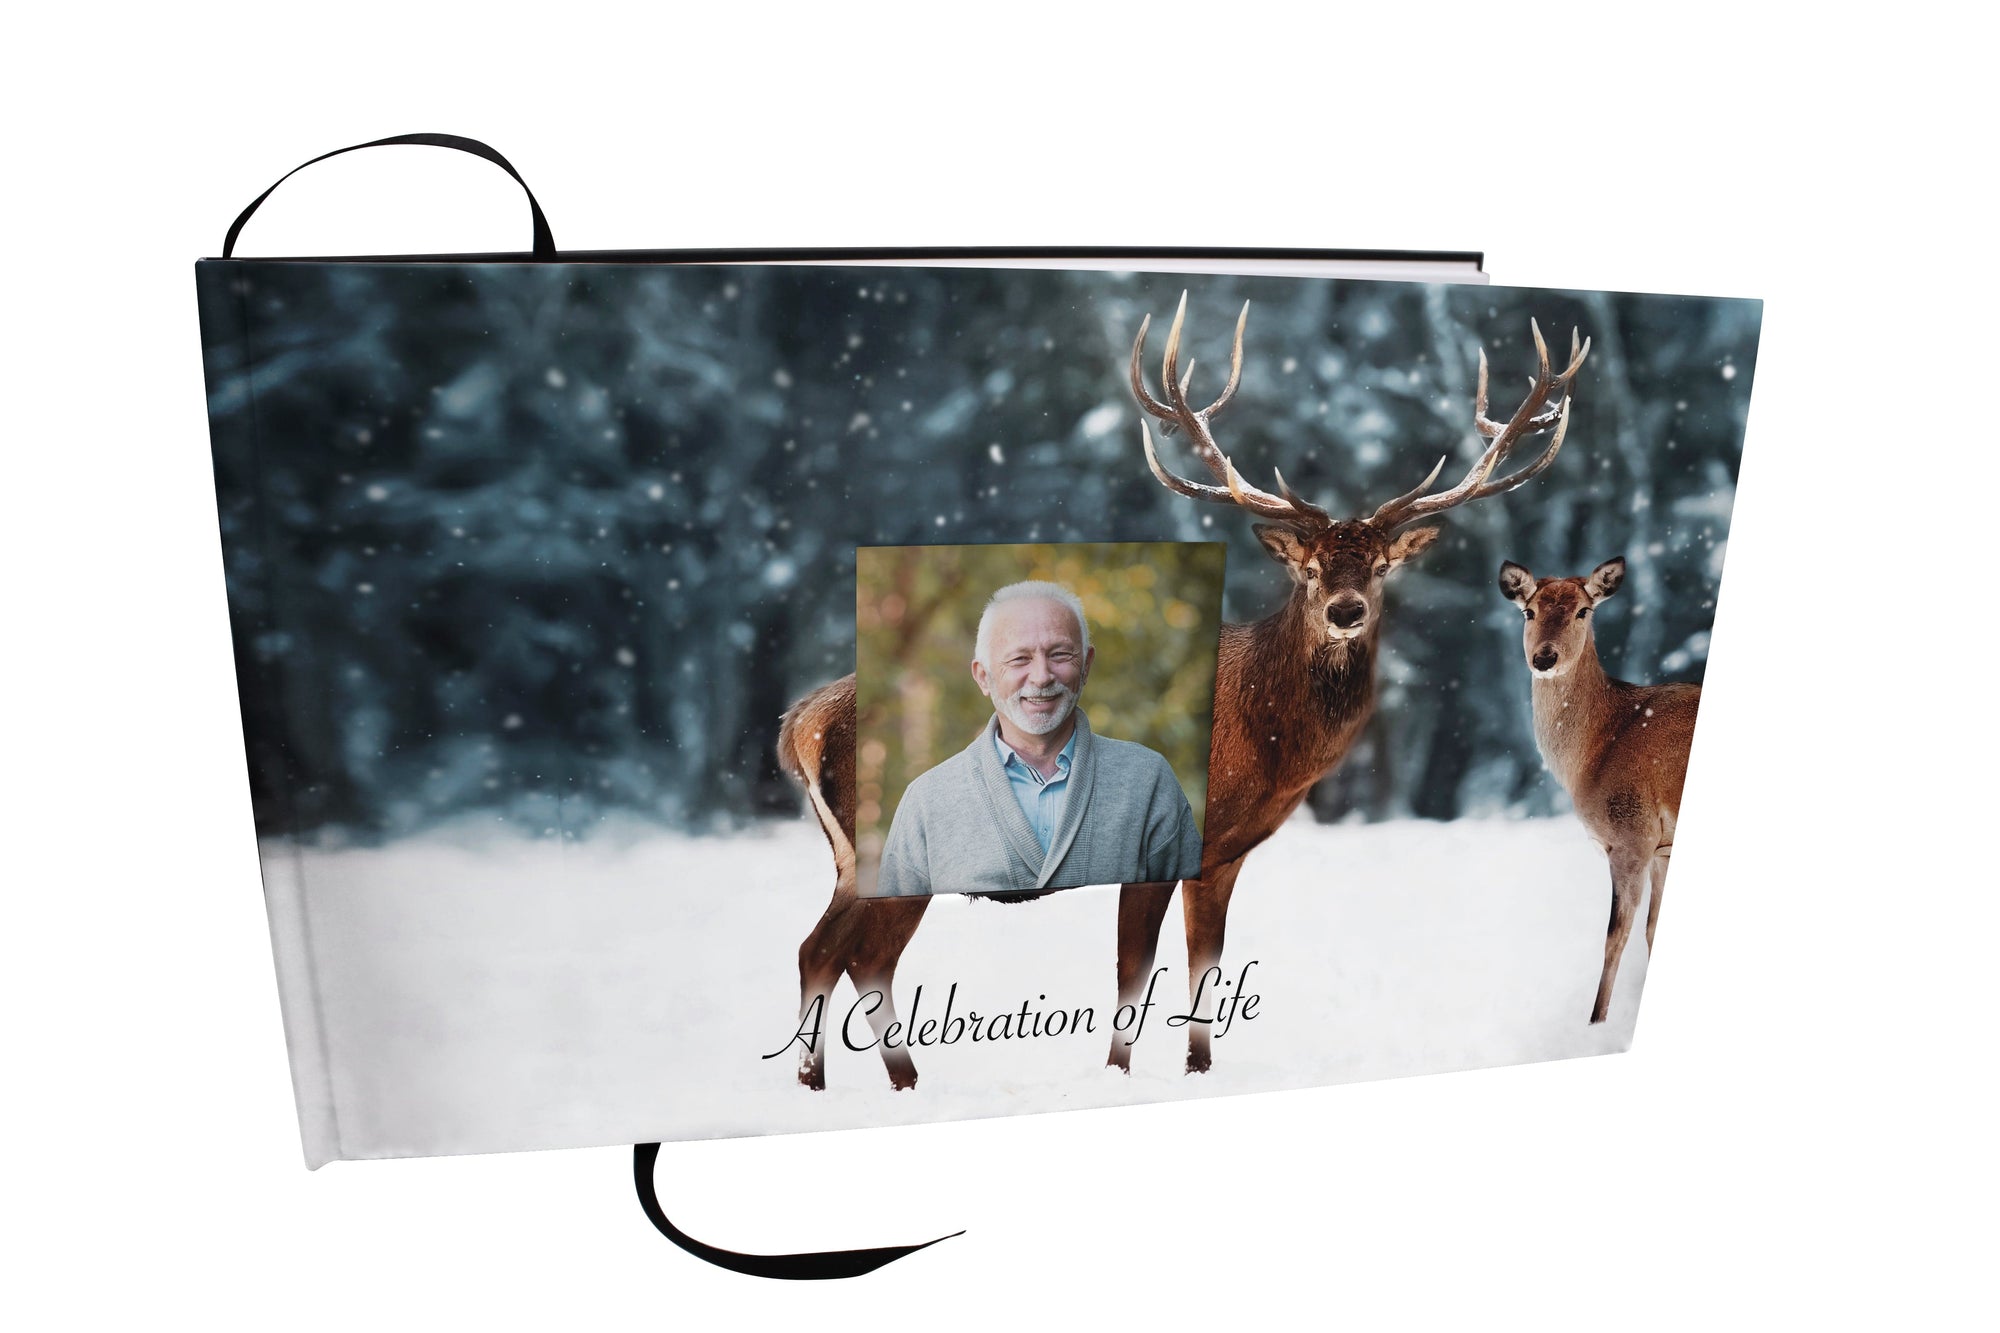 Commemorative Cremation Urns Deer Matching Themed 'Celebration of Life' Guest Book for Funeral or Memorial Service